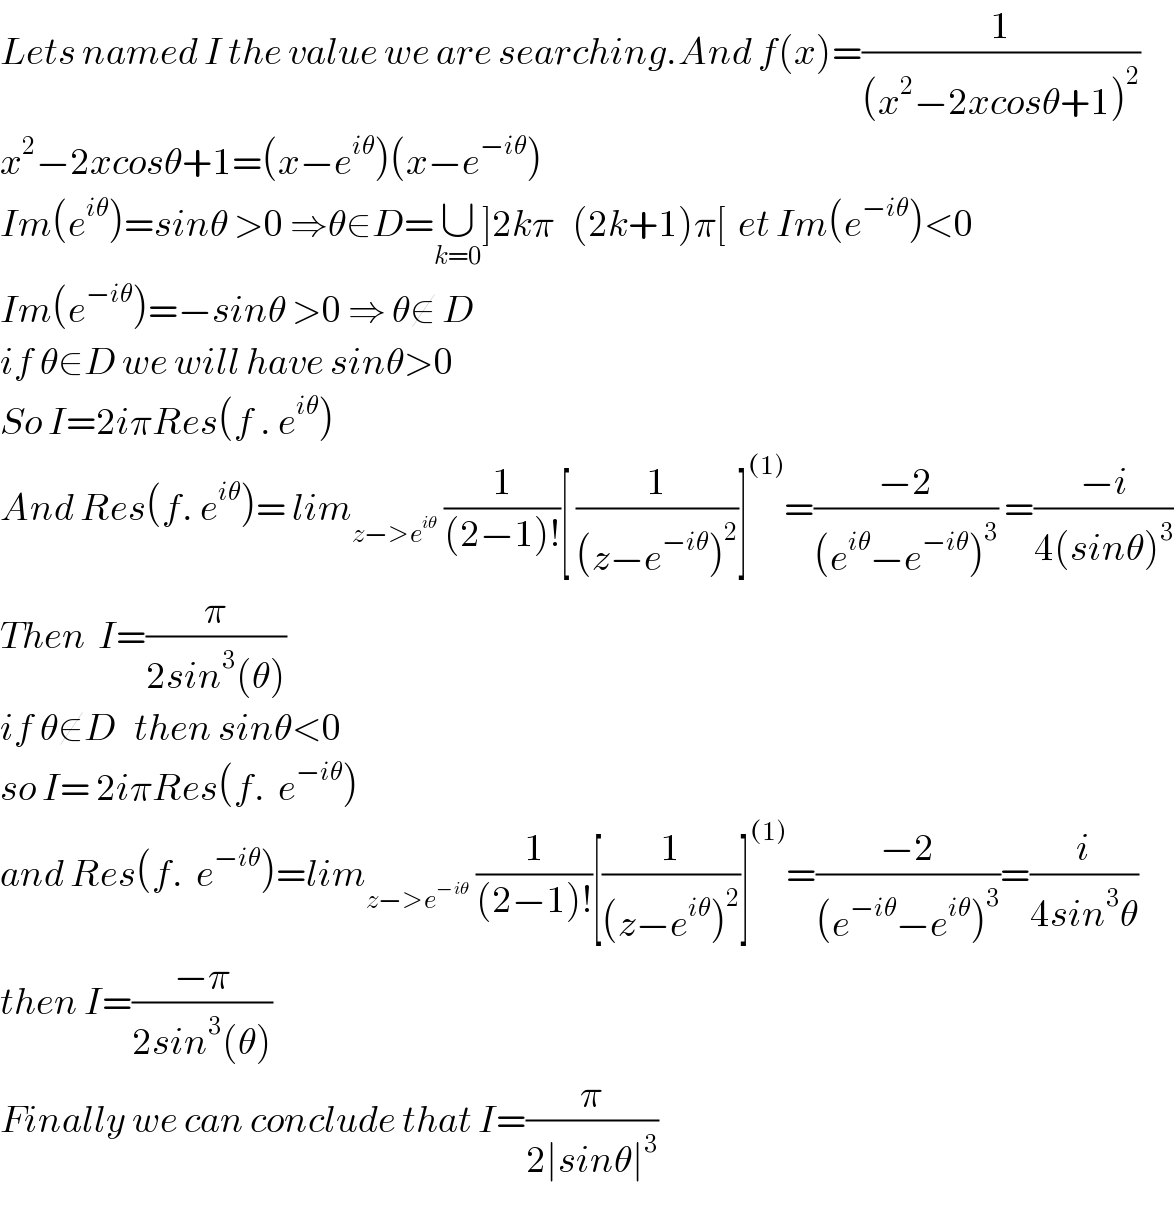 Lets named I the value we are searching.And f(x)=(1/((x^2 −2xcosθ+1)^2 ))  x^2 −2xcosθ+1=(x−e^(iθ) )(x−e^(−iθ) )  Im(e^(iθ) )=sinθ >0 ⇒θ∈D=∪_(k=0) ]2kπ   (2k+1)π[  et Im(e^(−iθ) )<0  Im(e^(−iθ) )=−sinθ >0 ⇒ θ∉ D  if θ∈D we will have sinθ>0  So I=2iπRes(f . e^(iθ) )  And Res(f. e^(iθ) )= lim_(z−>e^(iθ) )  (1/((2−1)!))[ (1/((z−e^(−iθ) )^2 ))]^((1)) =((−2)/((e^(iθ) −e^(−iθ) )^3 )) =((−i)/(4(sinθ)^3 ))  Then  I=(π/(2sin^3 (θ)))  if θ∉D   then sinθ<0  so I= 2iπRes(f.  e^(−iθ) )  and Res(f.  e^(−iθ) )=lim_(z−>e^(−iθ) )  (1/((2−1)!))[(1/((z−e^(iθ) )^2 ))]^((1)) =((−2)/((e^(−iθ) −e^(iθ) )^3 ))=(i/(4sin^3 θ))  then I=((−π)/(2sin^3 (θ)))  Finally we can conclude that I=(π/(2∣sinθ∣^3 ))  